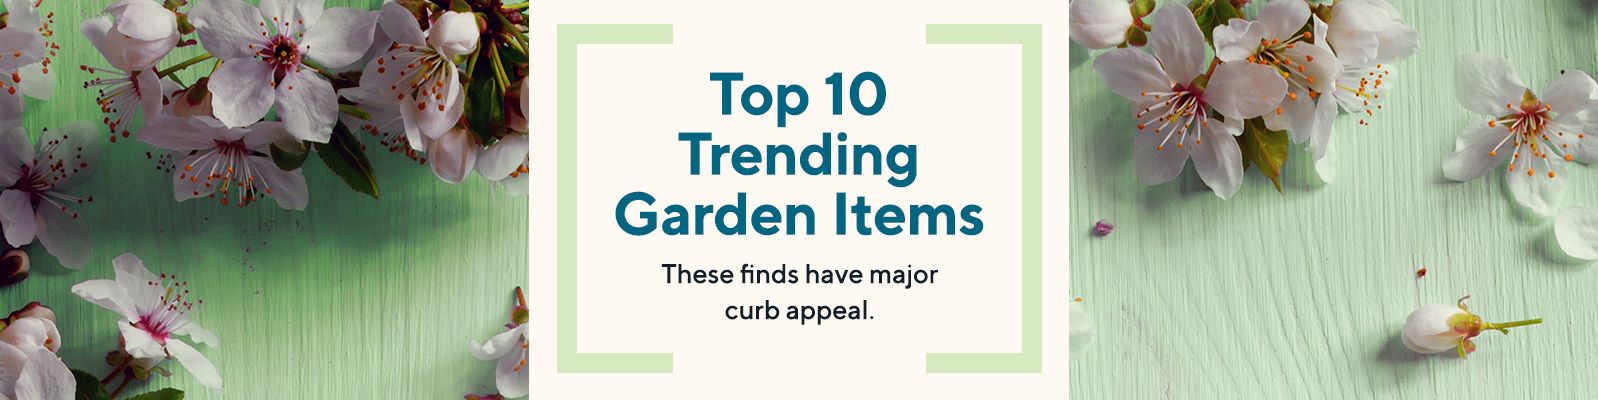 Top 10 Trending Garden Items - These finds have major curb appeal. 